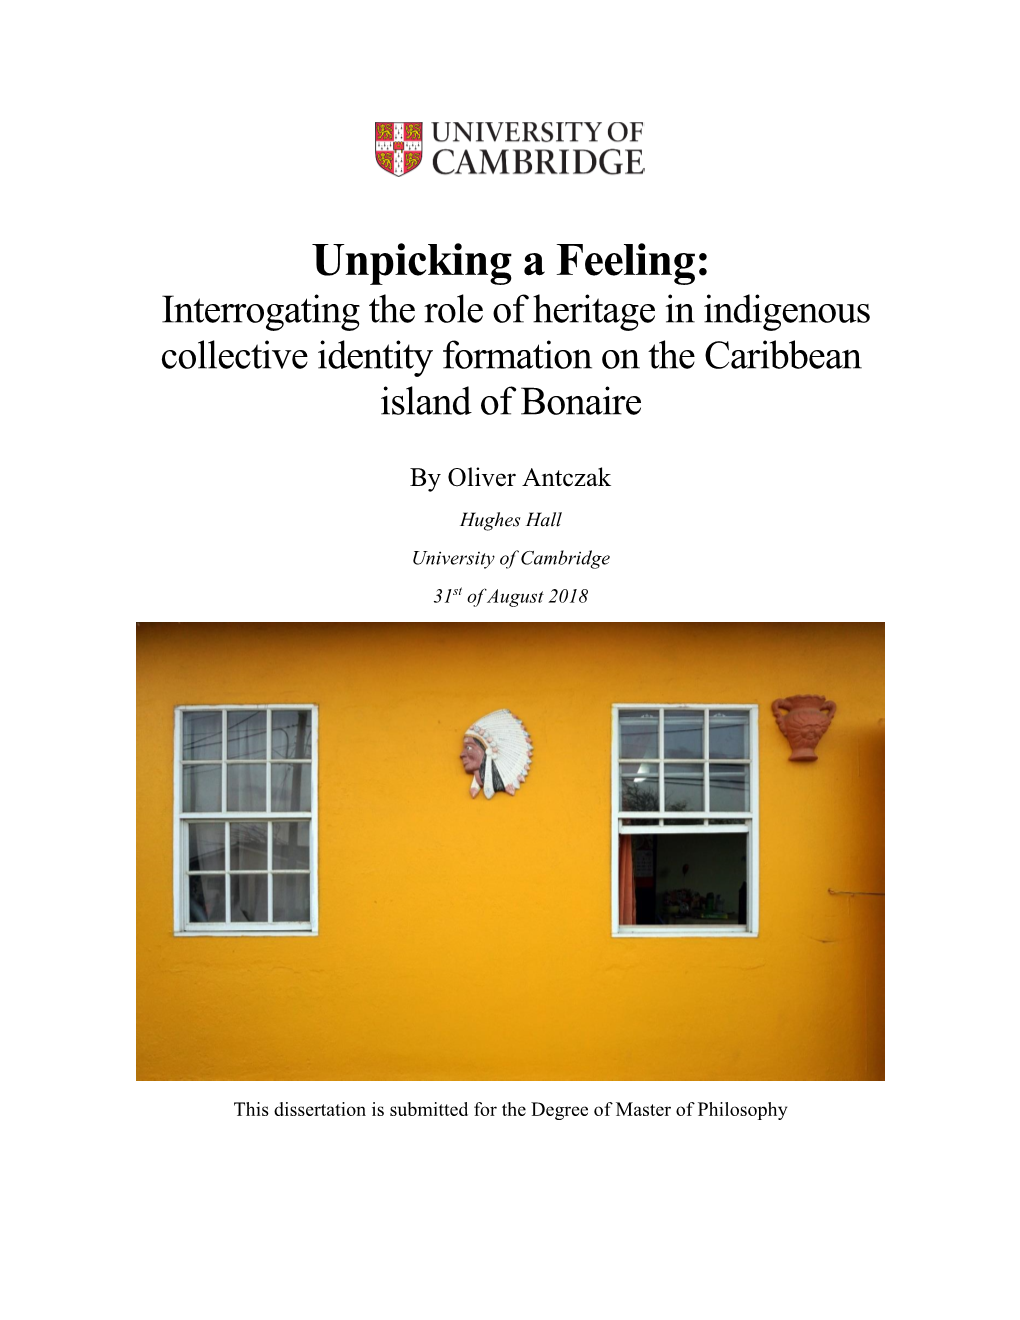 Unpicking a Feeling: Interrogating the Role of Heritage in Indigenous Collective Identity Formation on the Caribbean Island of Bonaire